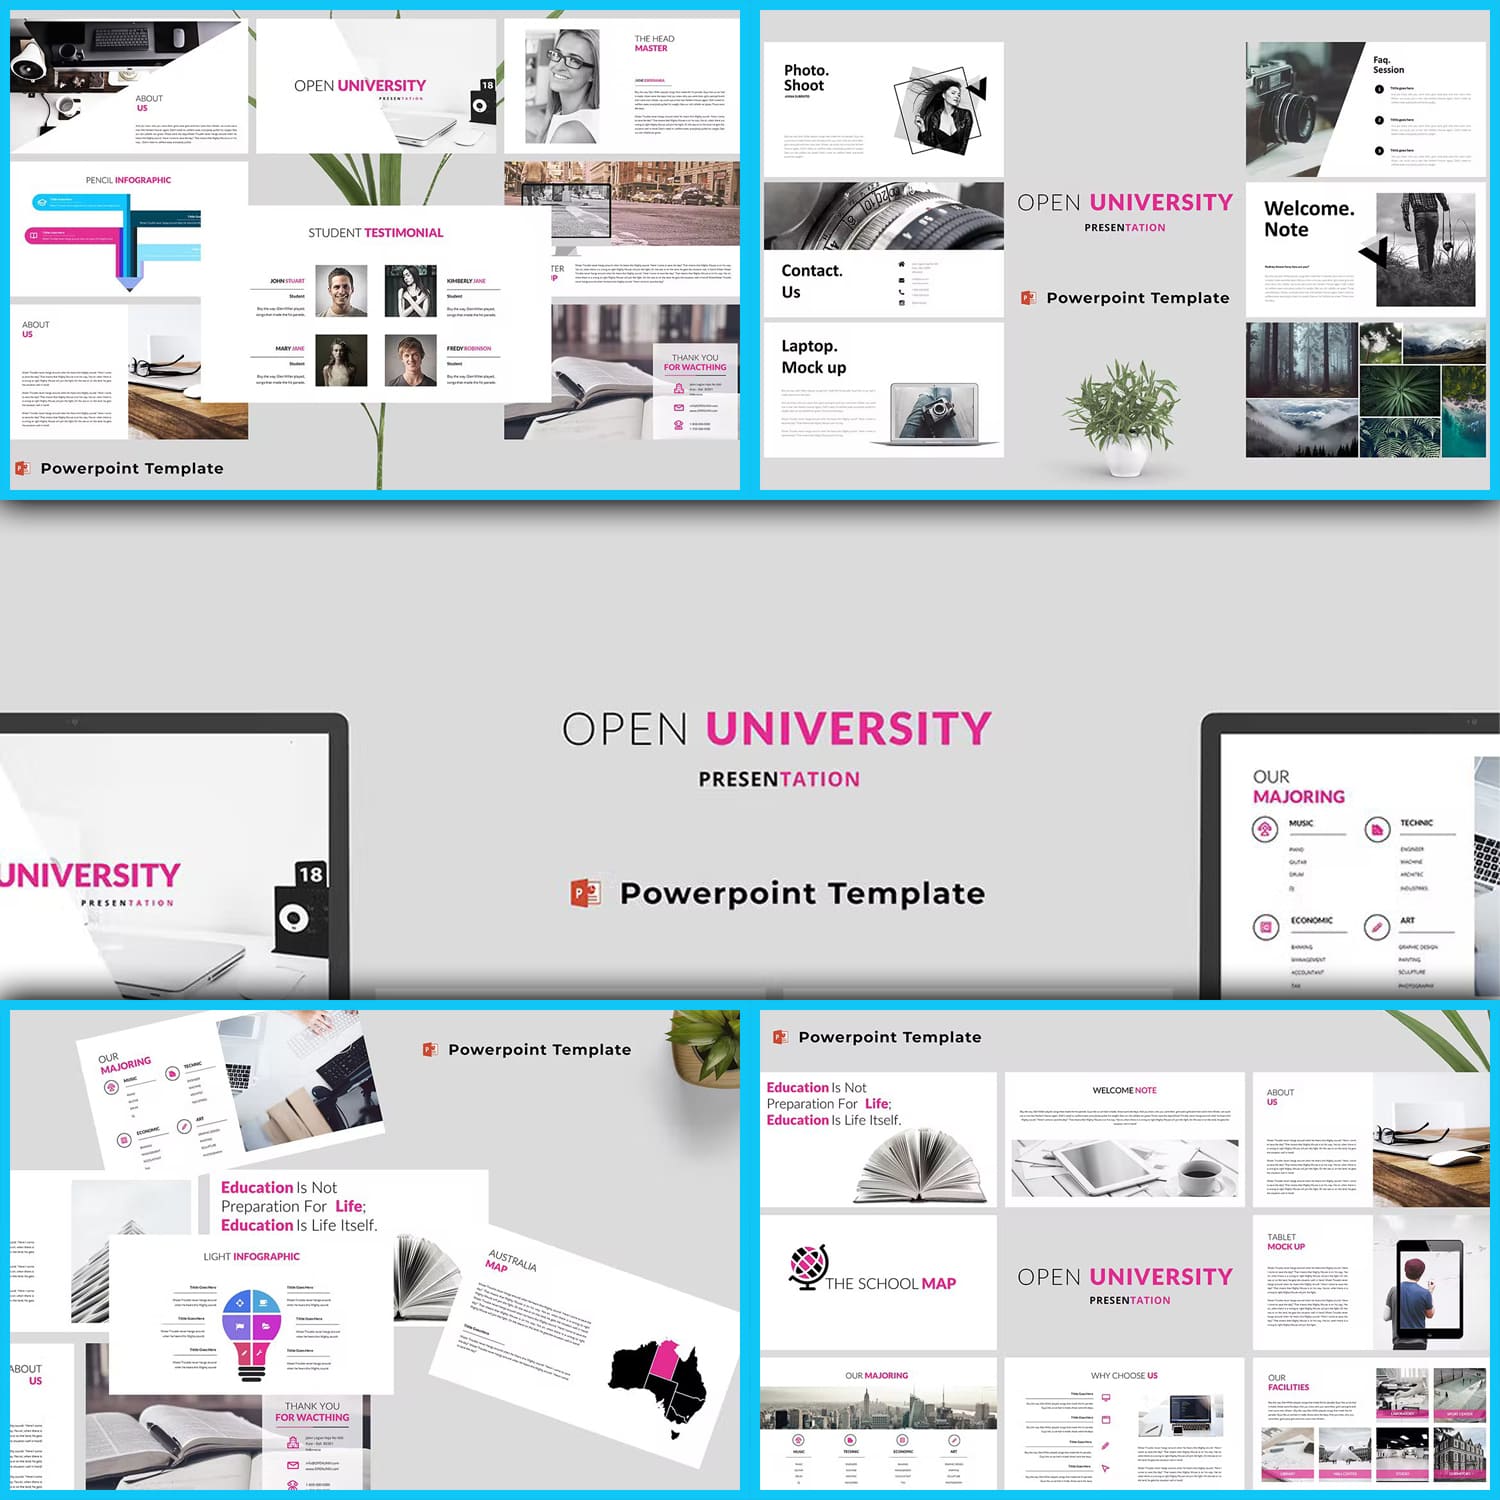 Open University Powerpoint Template created by Incools.